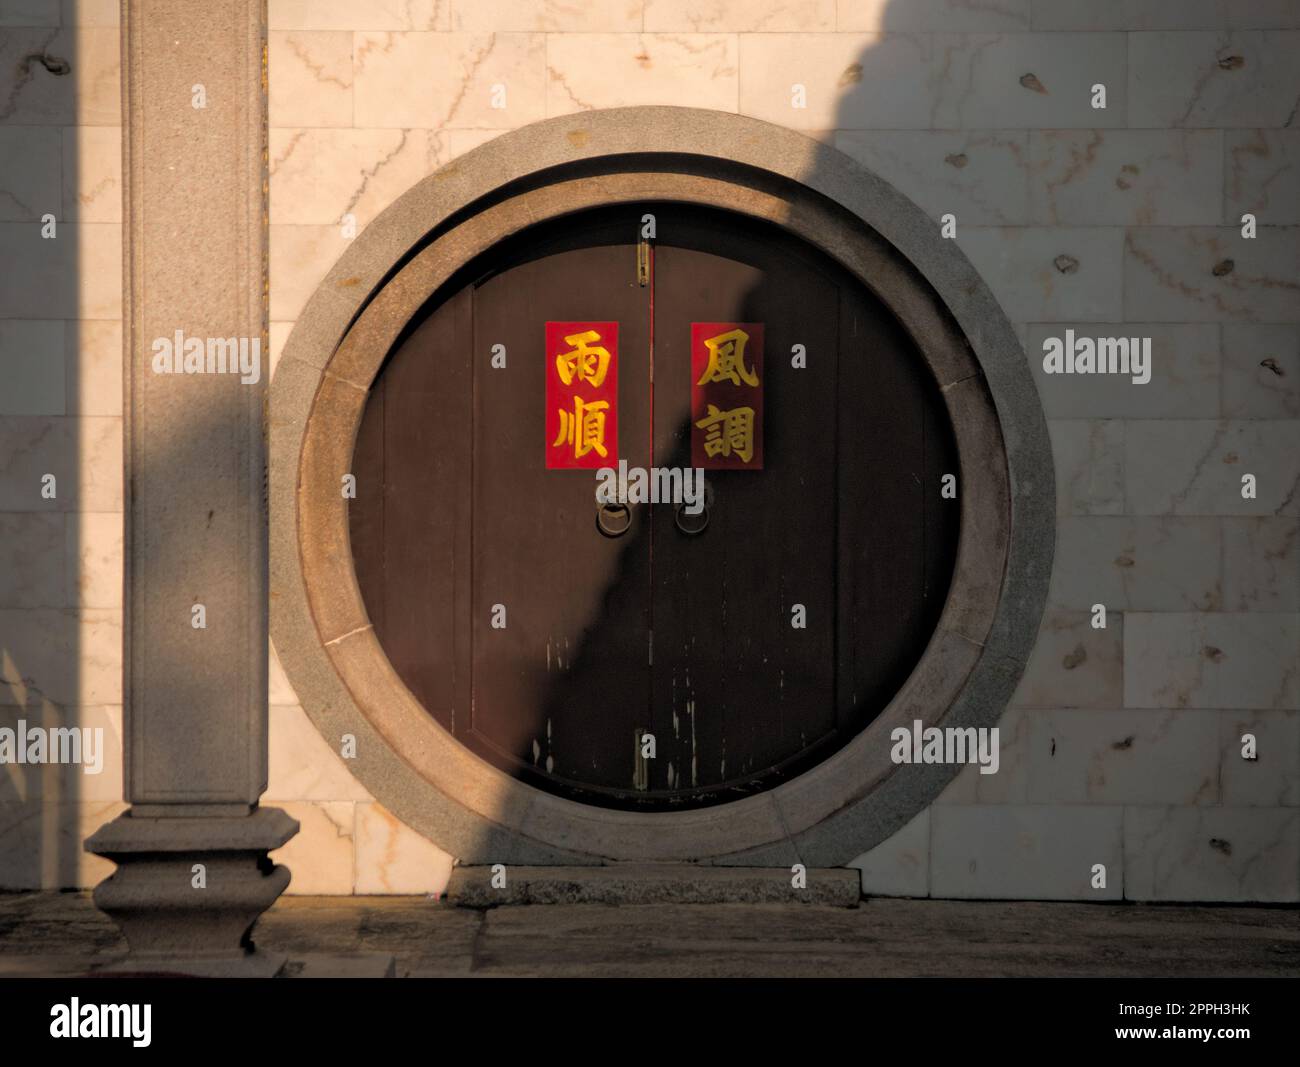 Circular door at a chinese buddhist temple in Saigon, Vietnam. The door is cut in half by light and shadow. The chinese writing says 'Rain' and 'Wind' Stock Photo